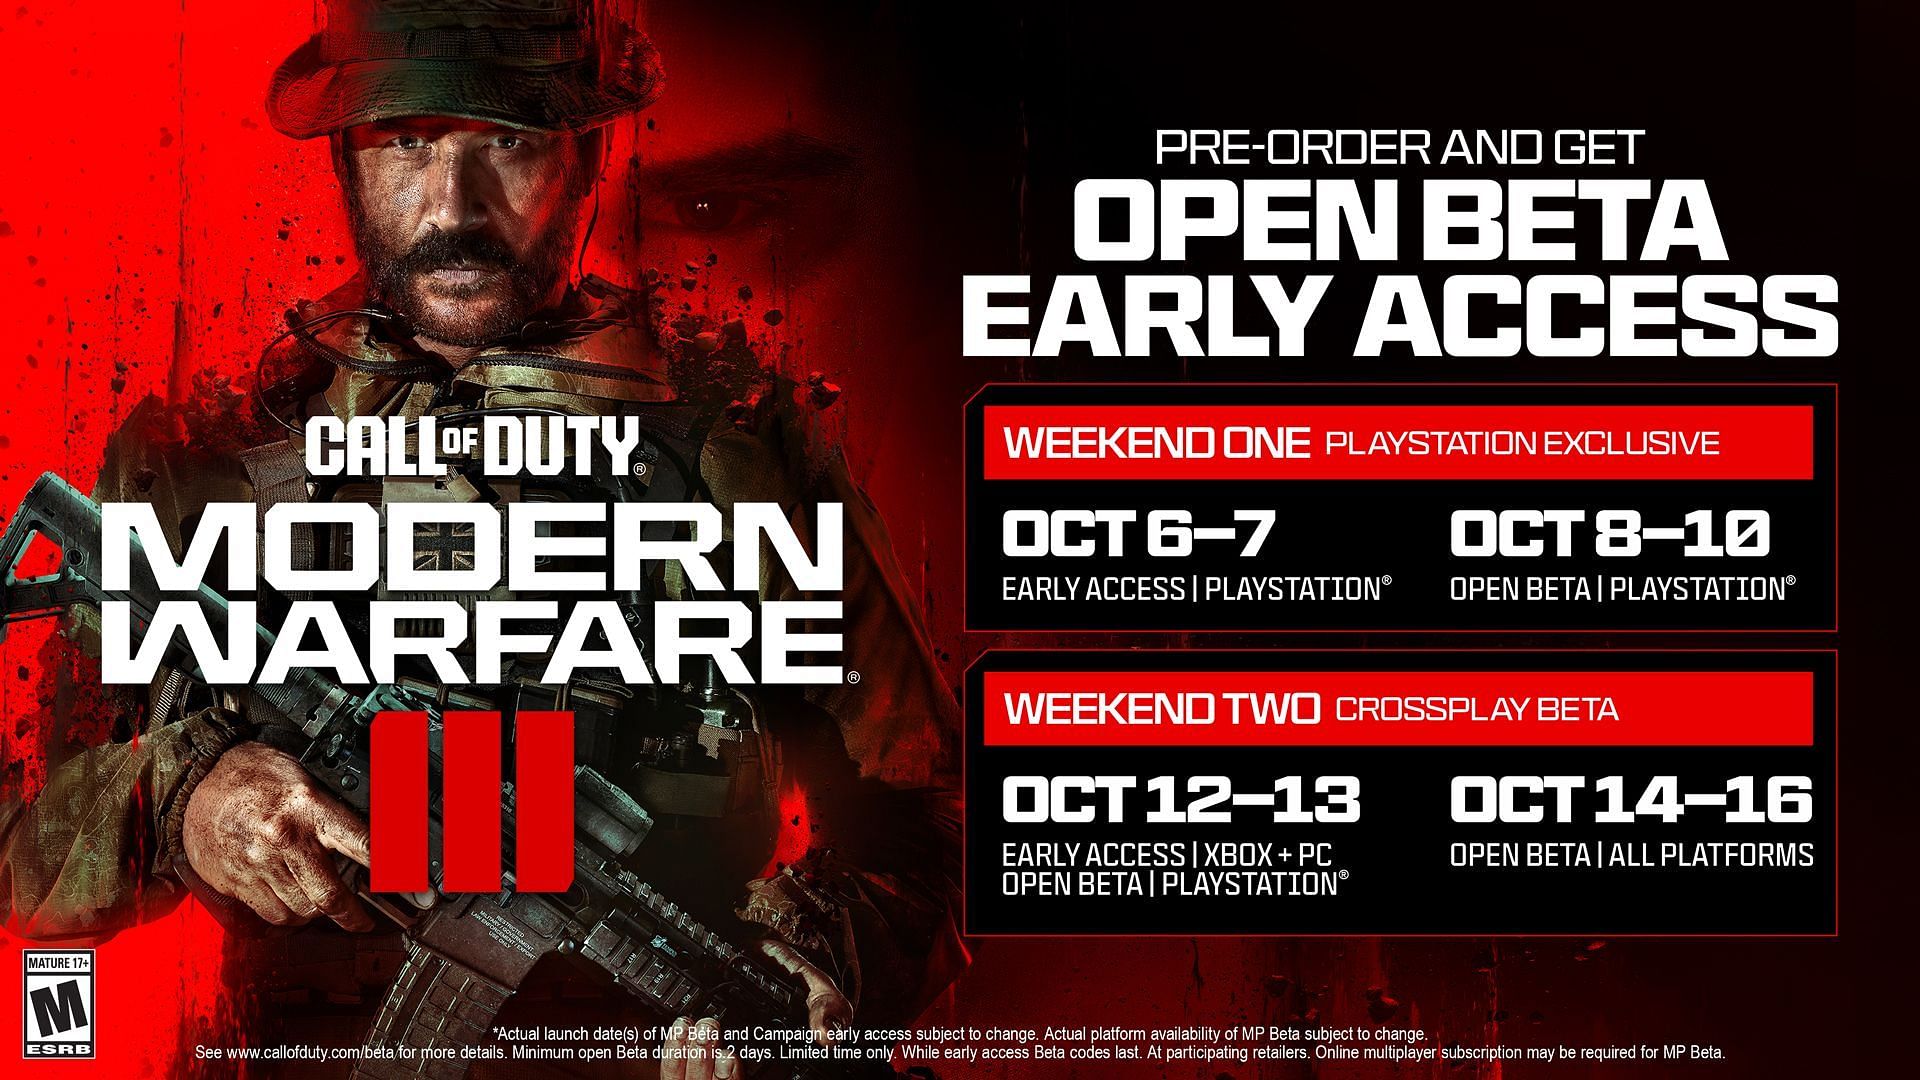 Call of Duty: Modern Warfare 3 preload and launch times